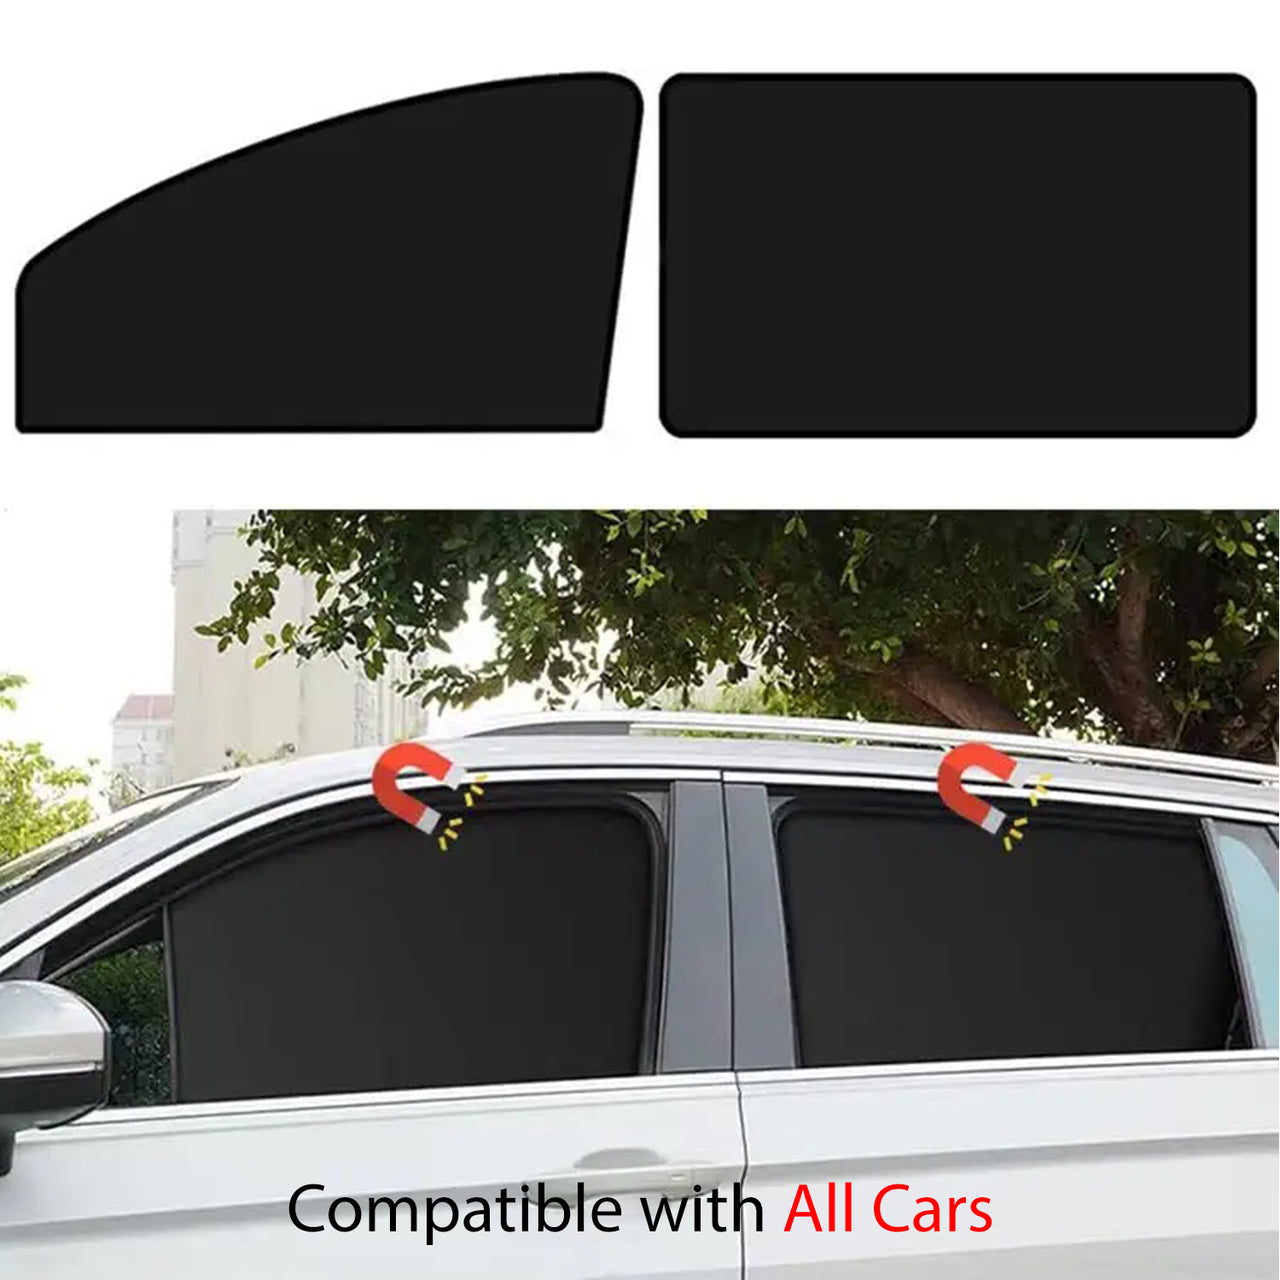 Car Side Window Sun Shades, Custom Fit For Your Cars, Window Sunshades Privacy Curtains, 100% Block Light for Breastfeeding, Taking a nap, Changing Clothes, Camping CC15980